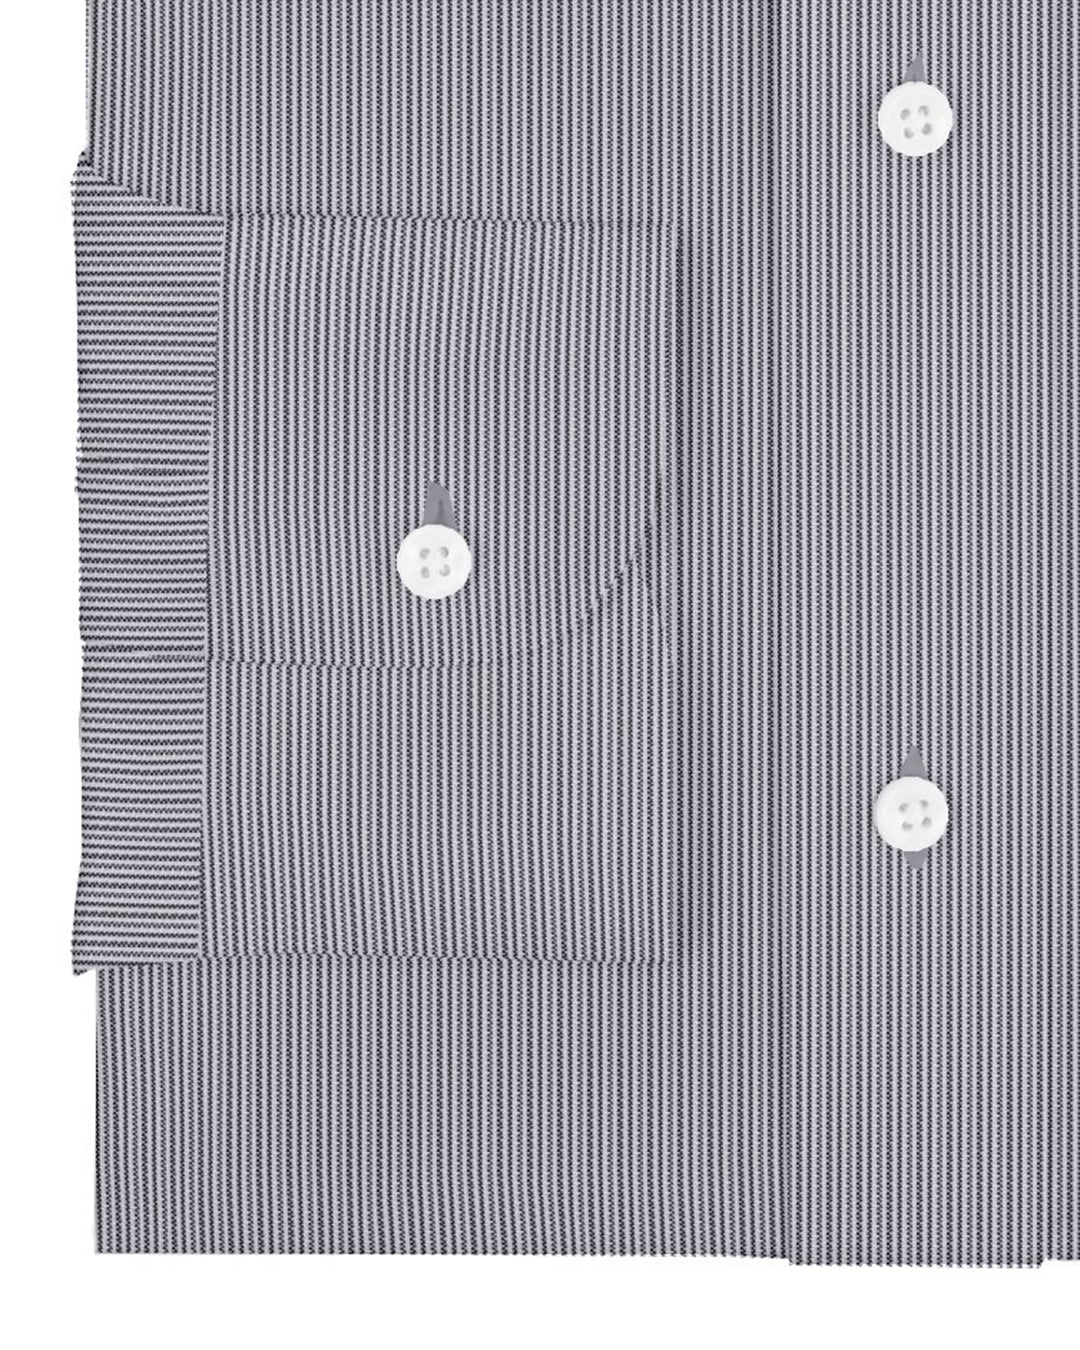 Cuff of the custom linen shirt for men in black and white dress stripes by Luxire Clothing